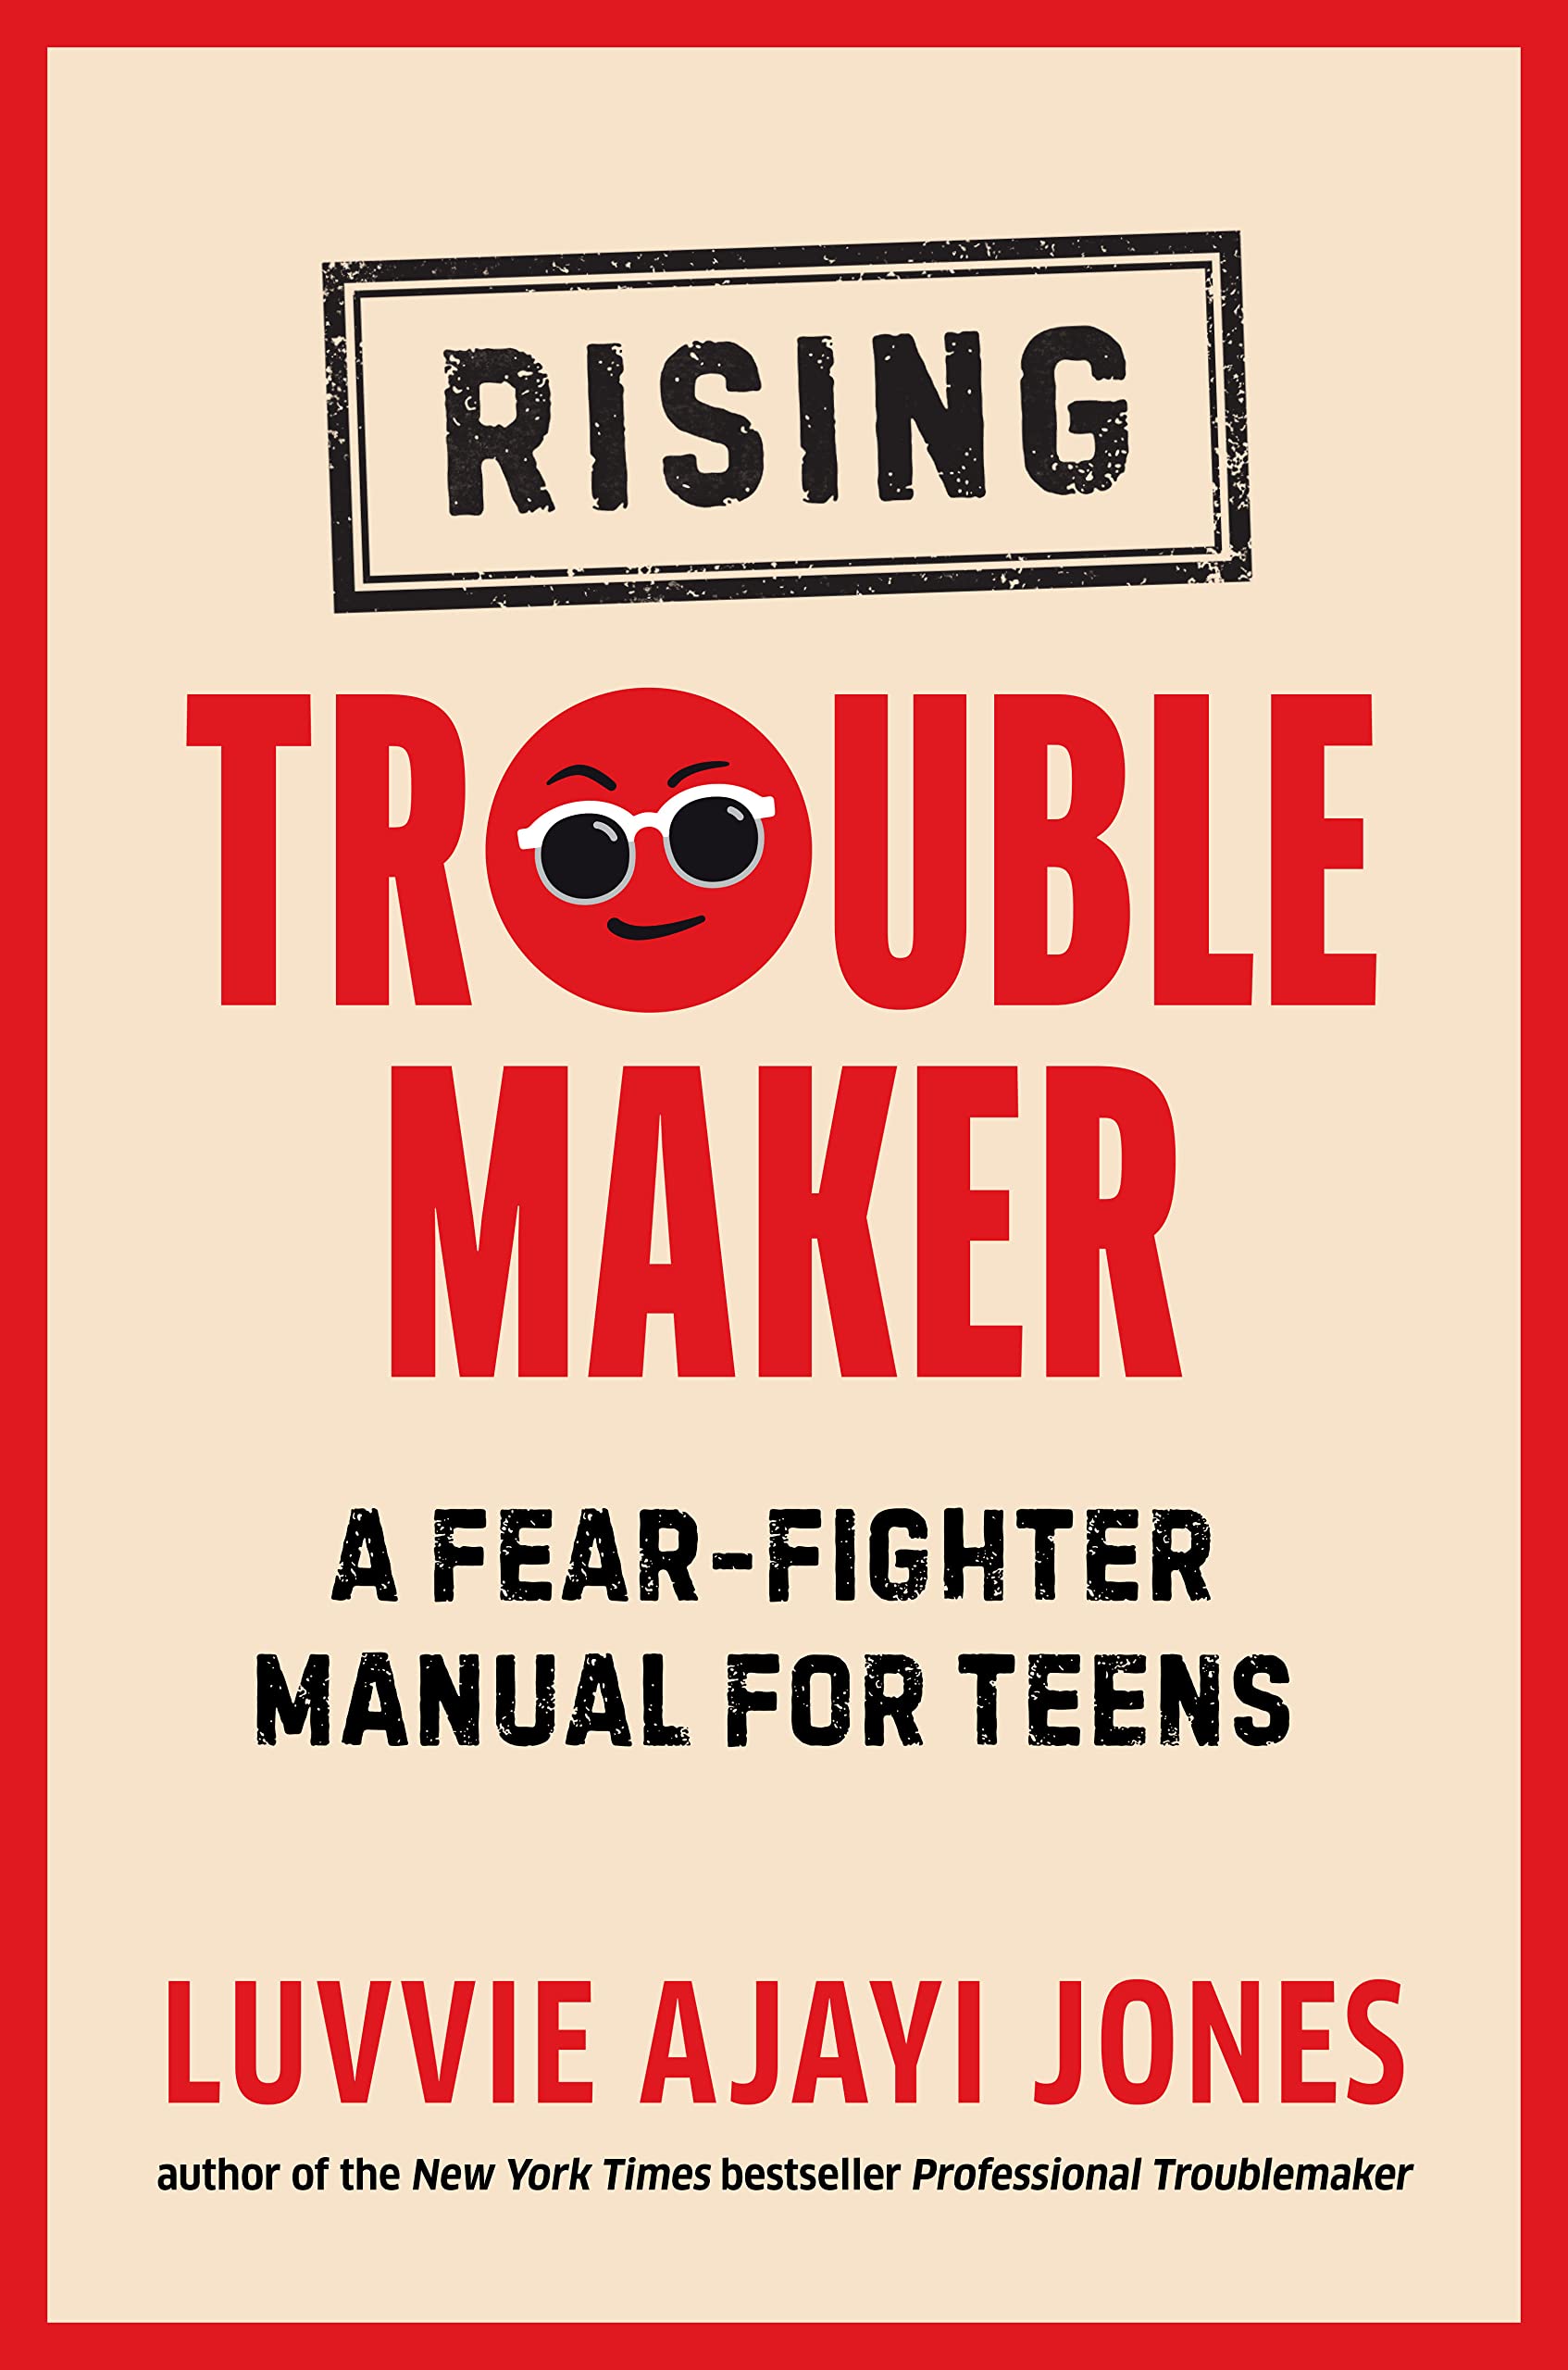 book cover rising troublemaker by luvvie ajayi jones